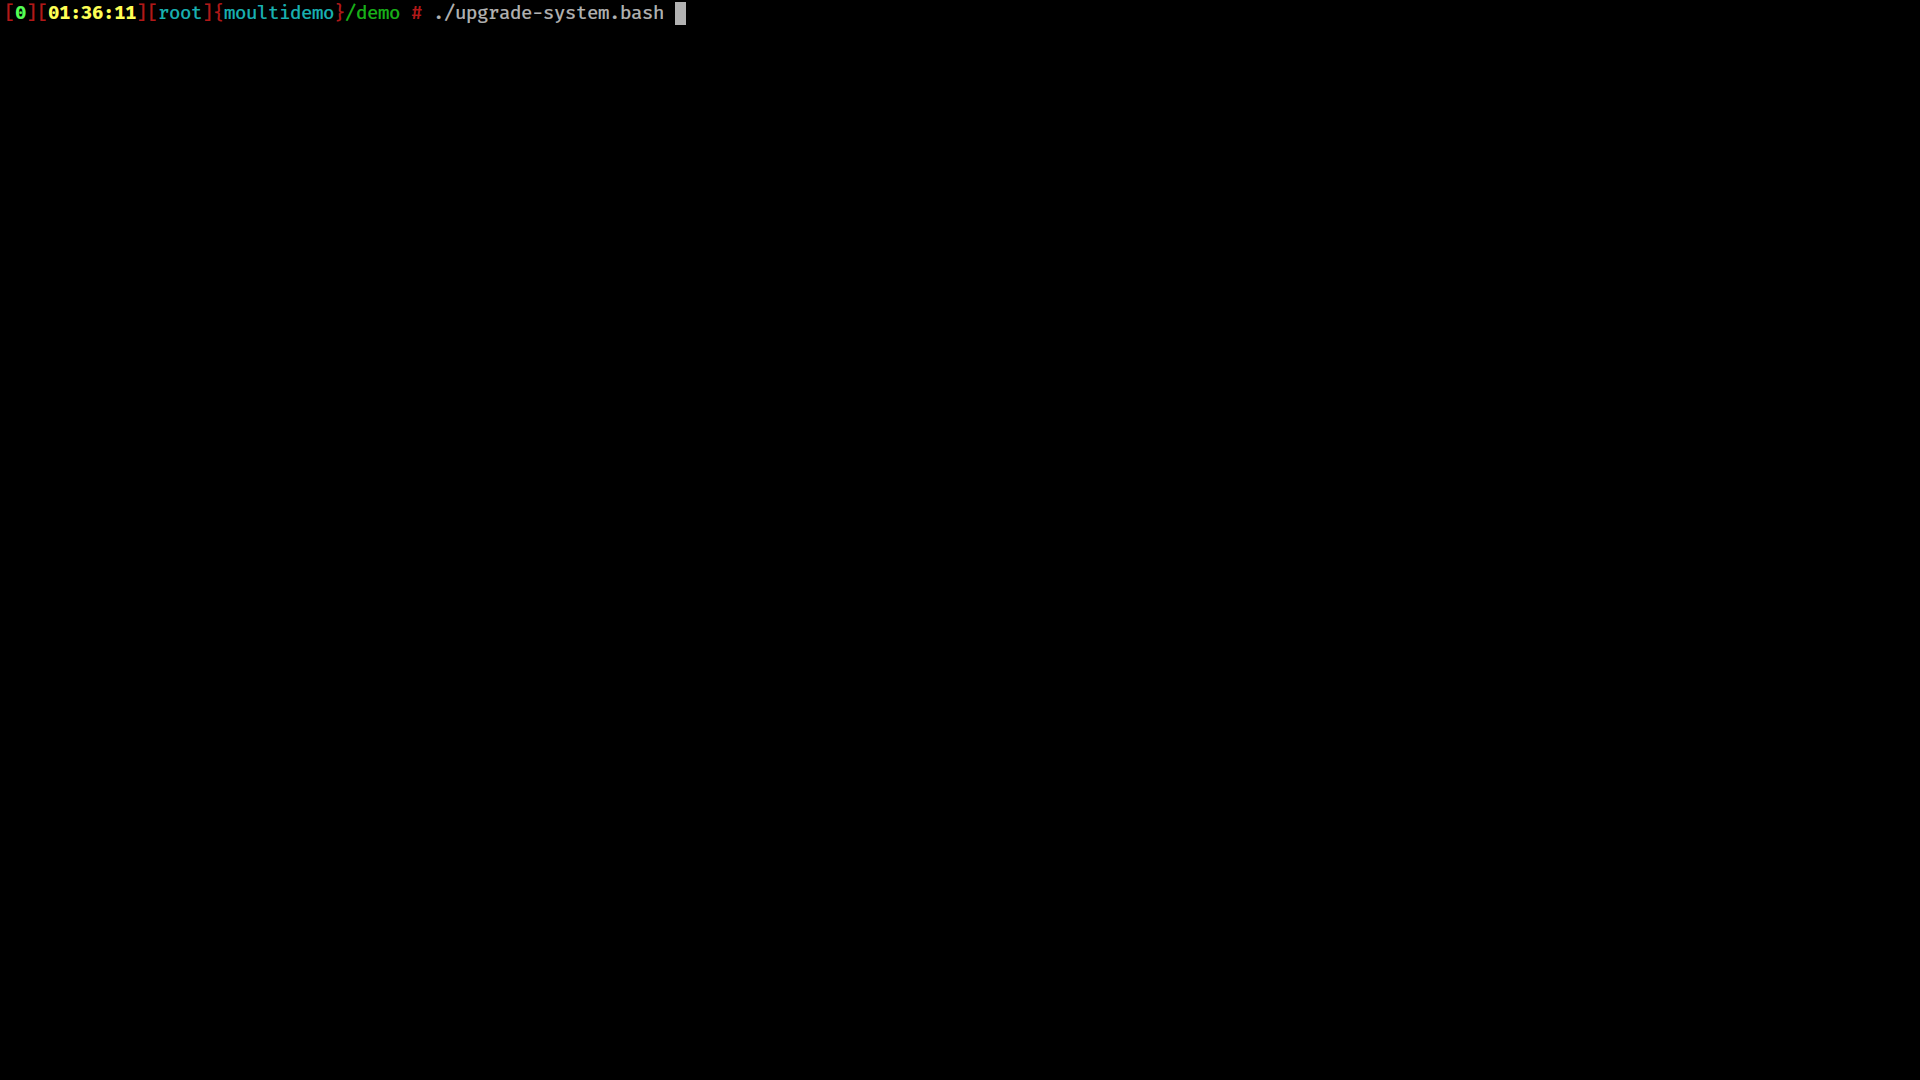 Moulti demo: Debian upgrade (Animated PNG)